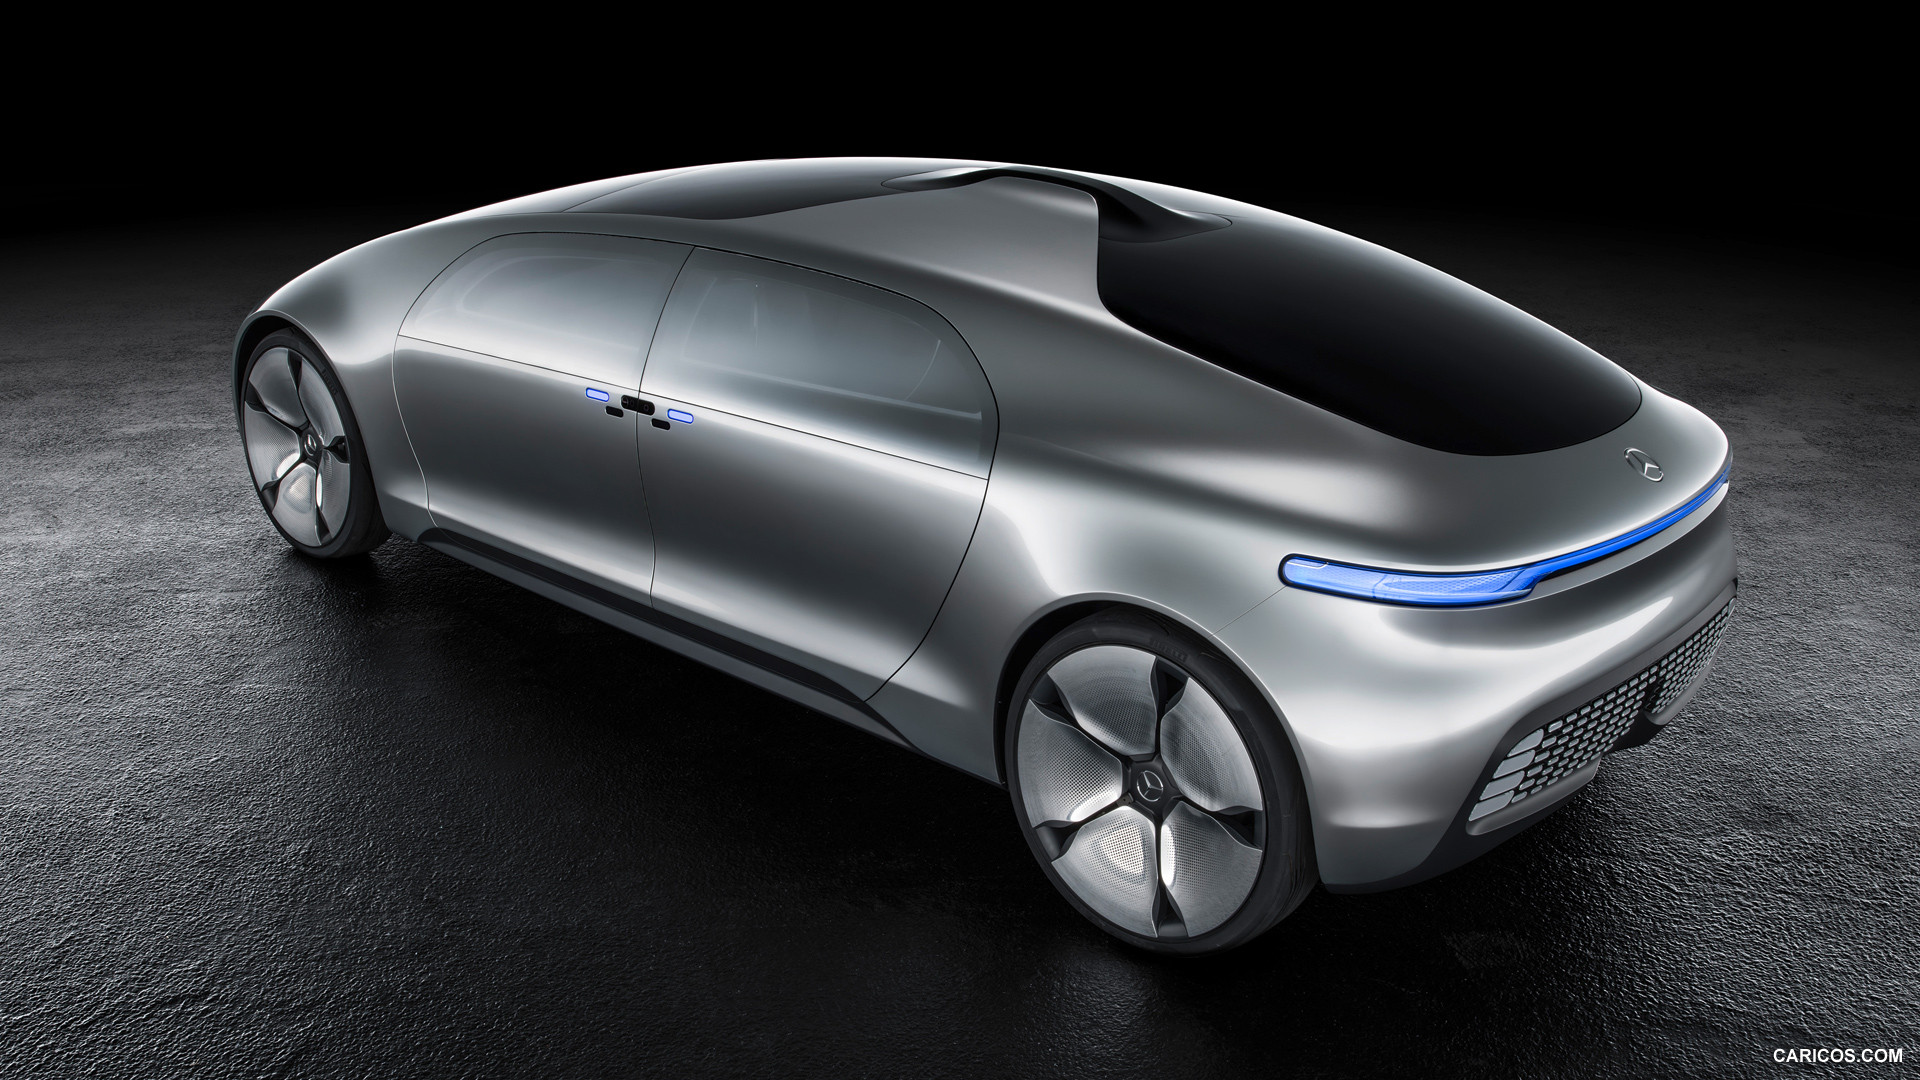 2015 Mercedes-Benz F 015 Luxury in Motion Concept  - Rear, #51 of 92